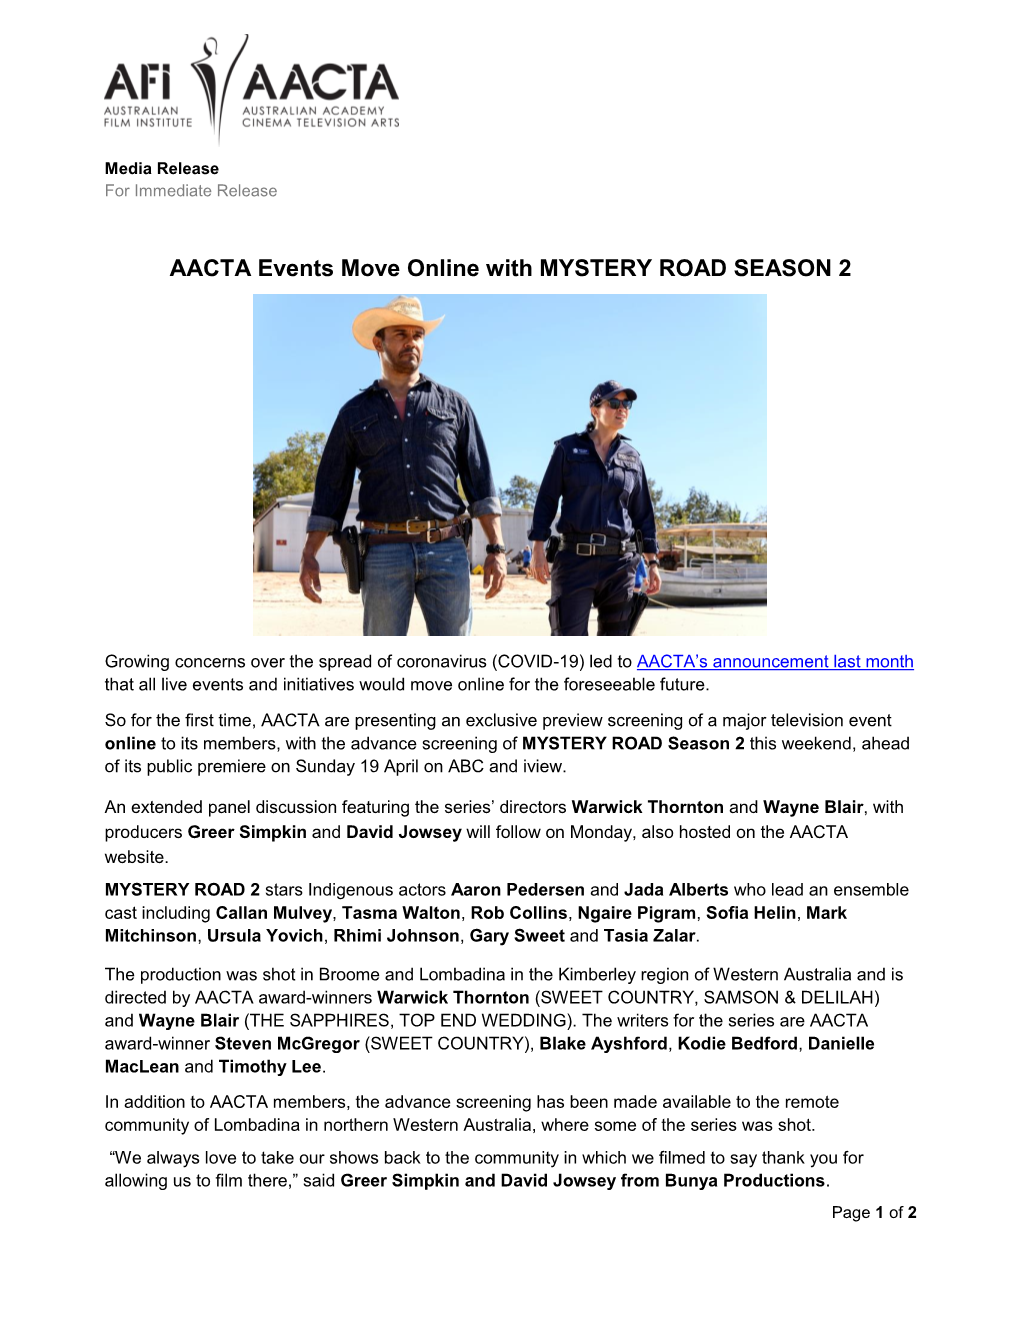 AACTA Events Move Online with MYSTERY ROAD SEASON 2